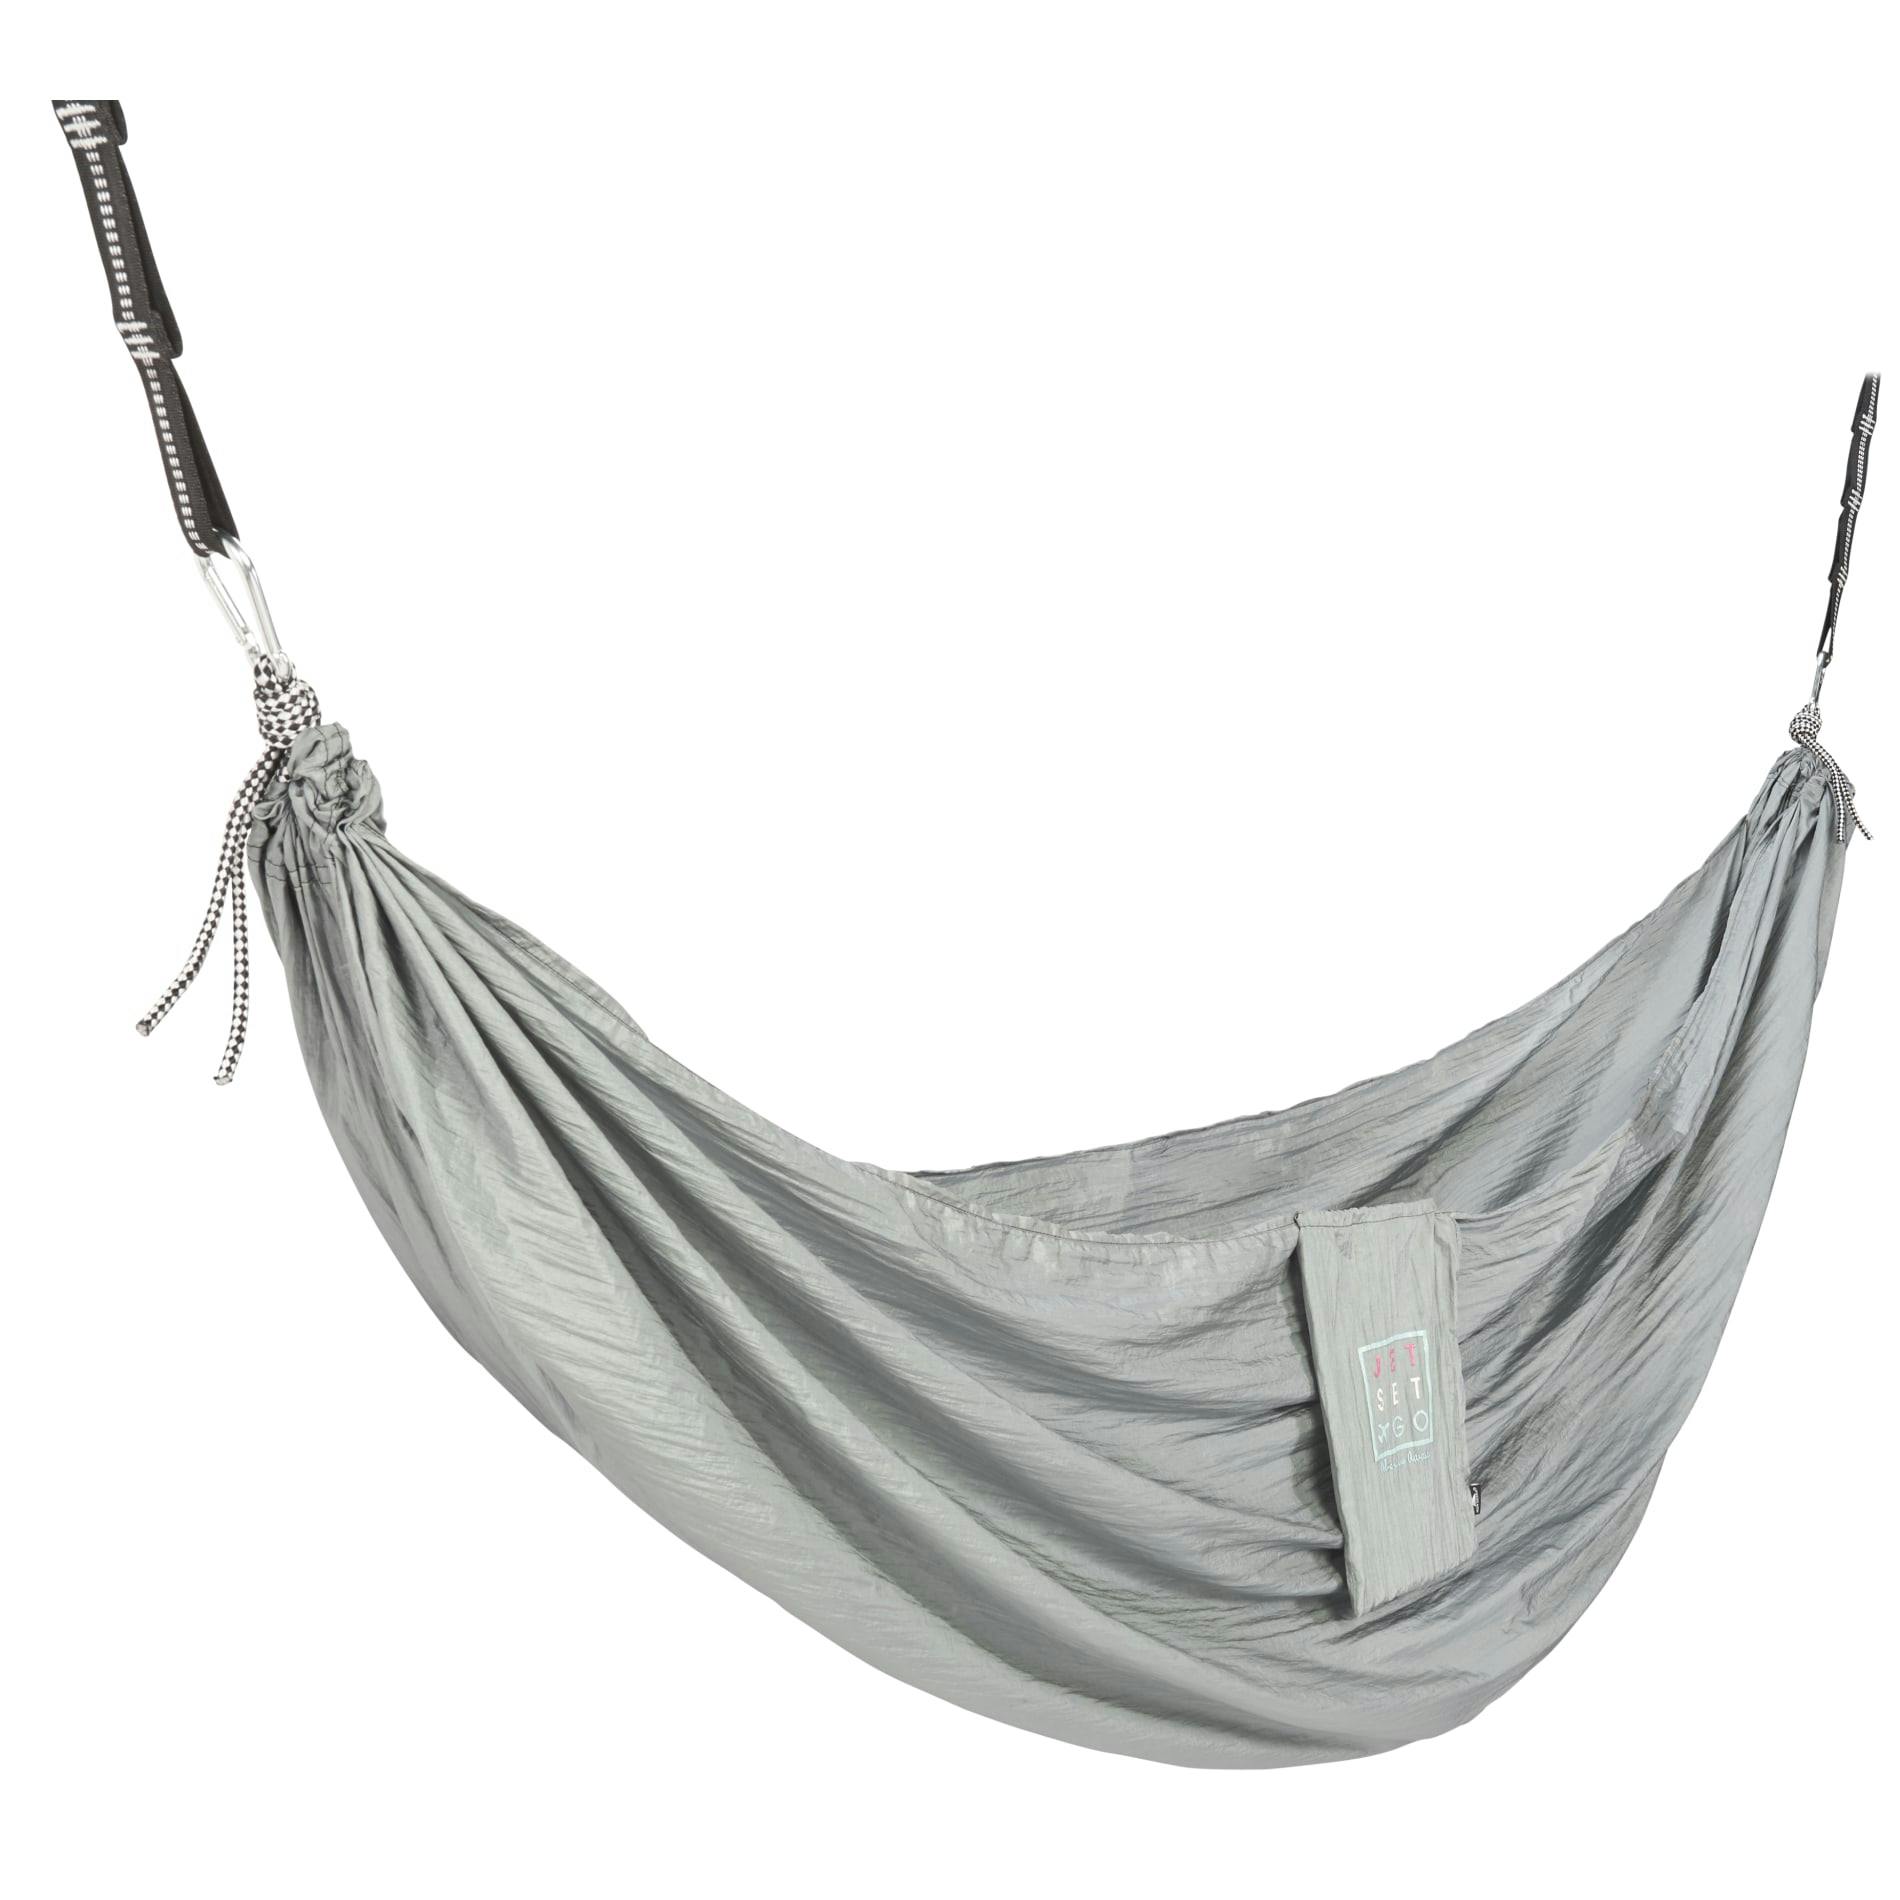 High Sierra Packable Hammock with Straps - additional Image 2